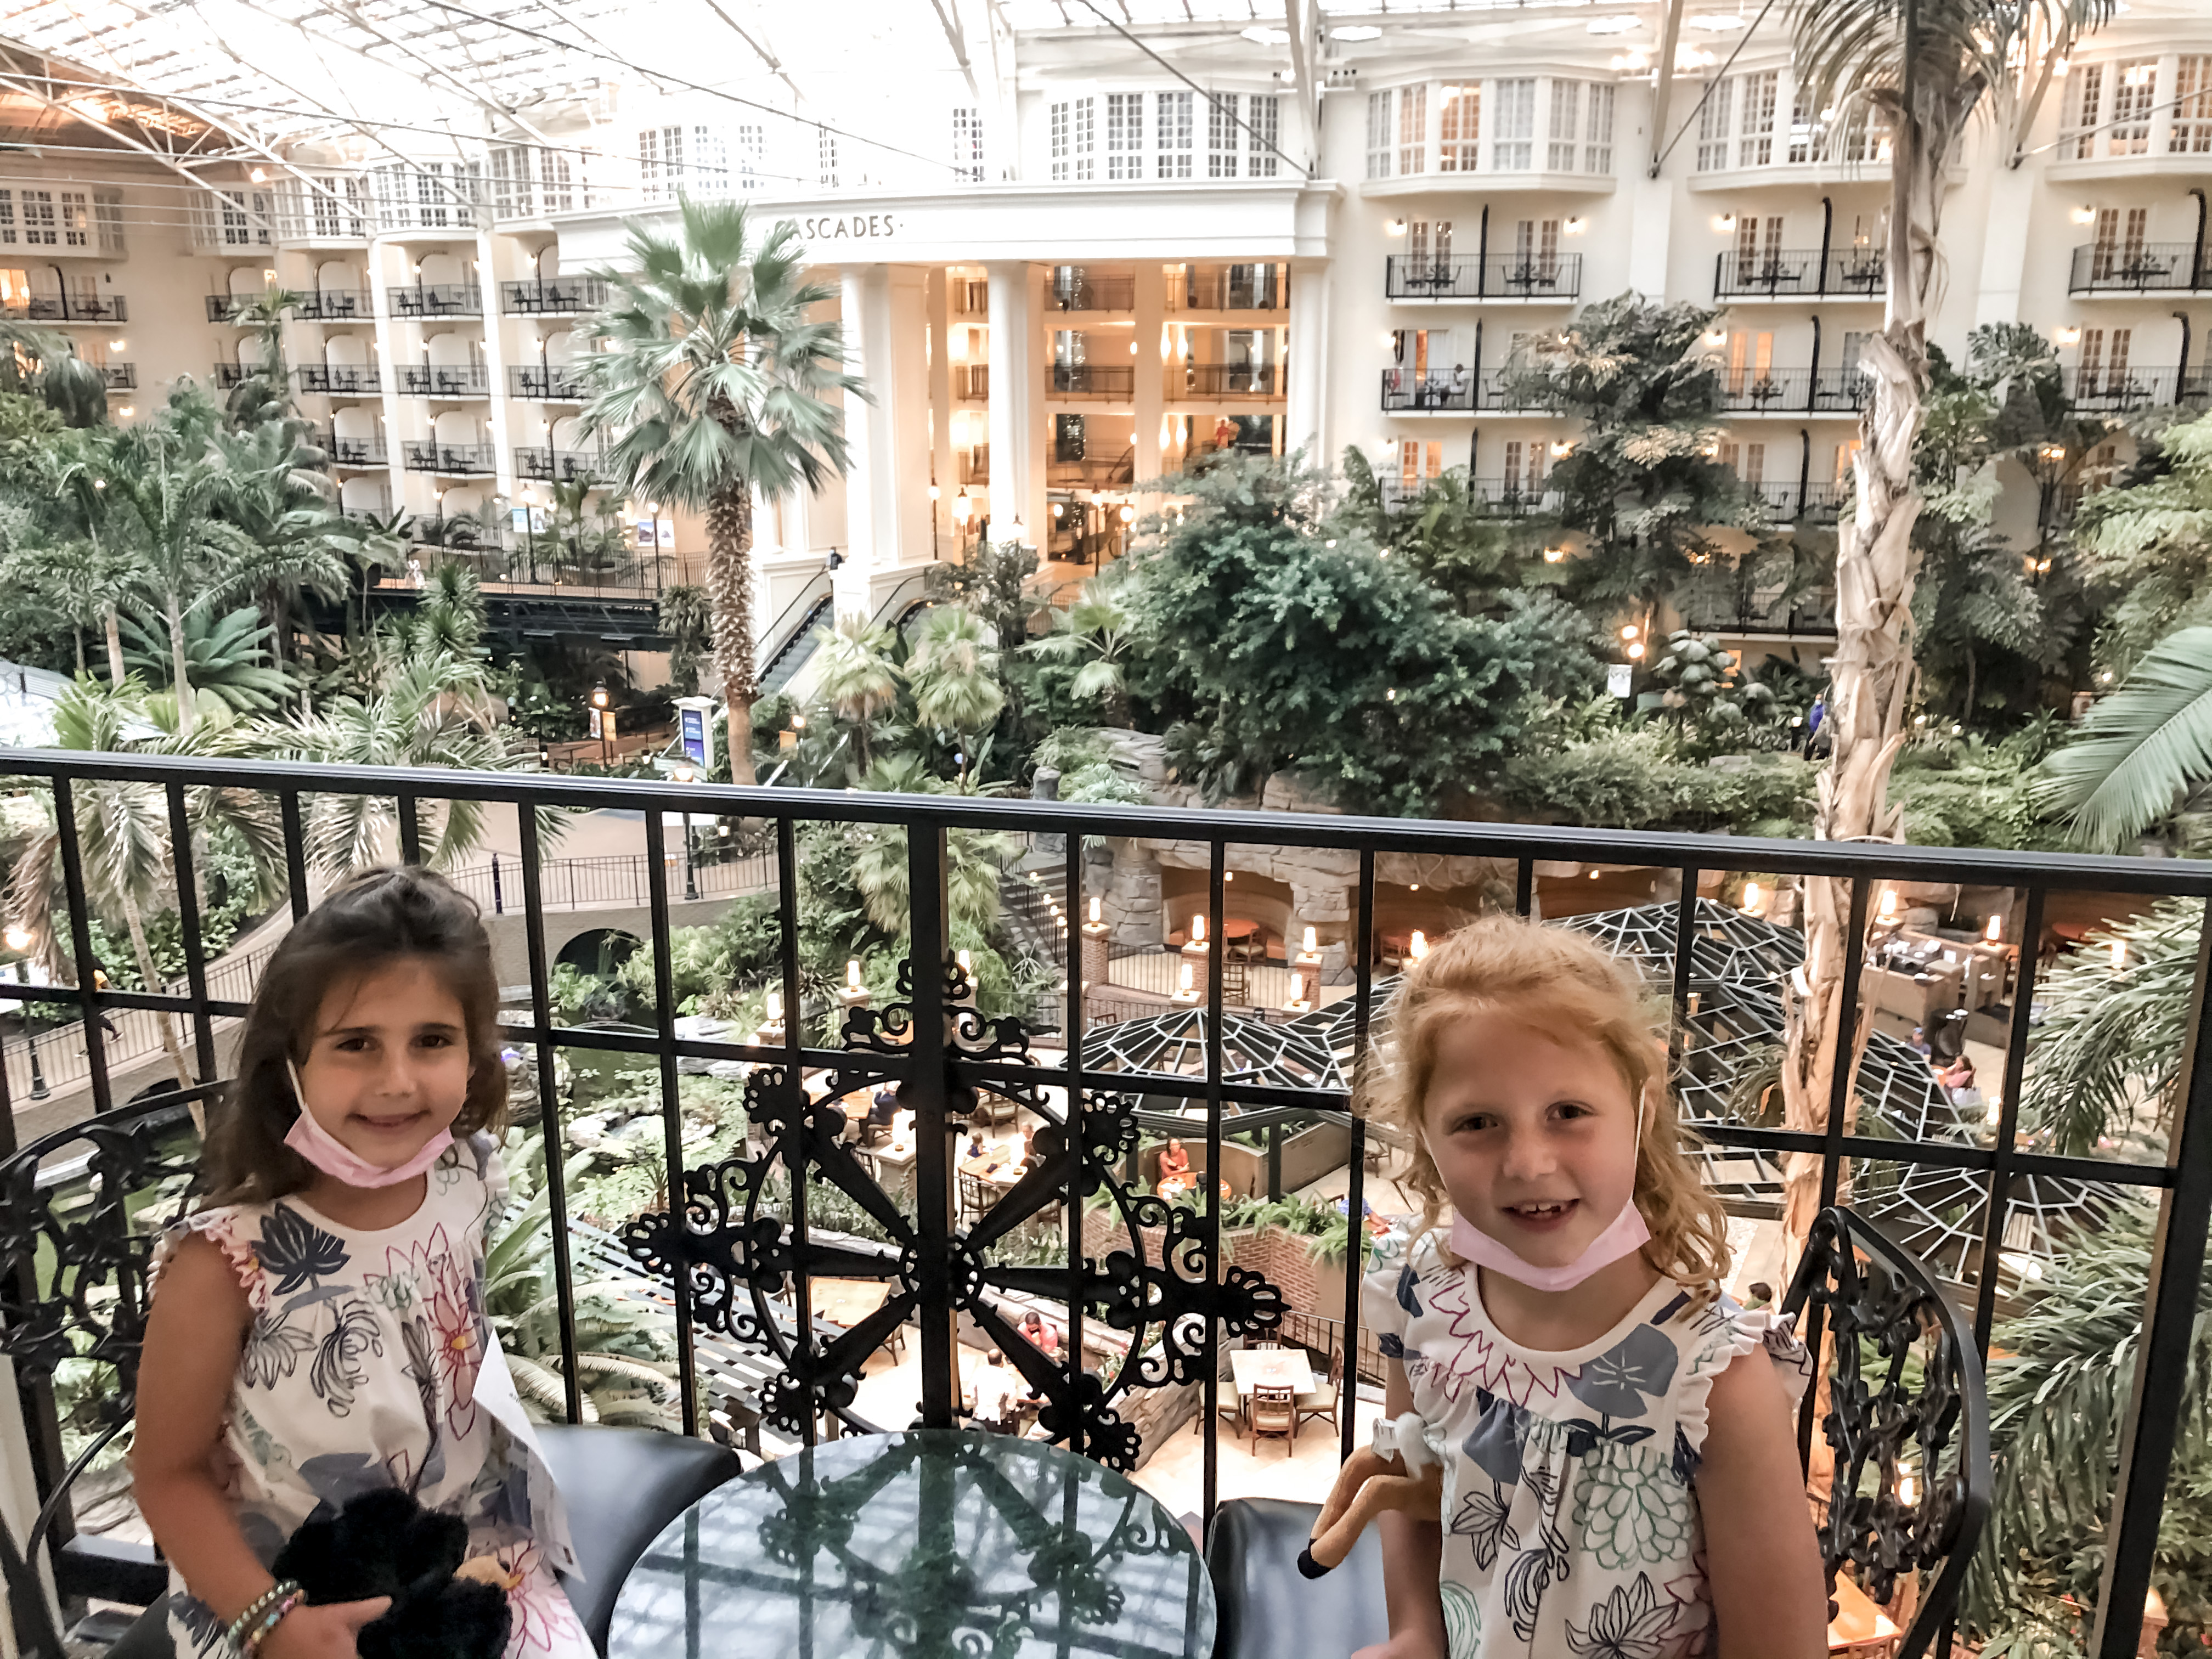 Opryland - View from balcony of atrium from interior room